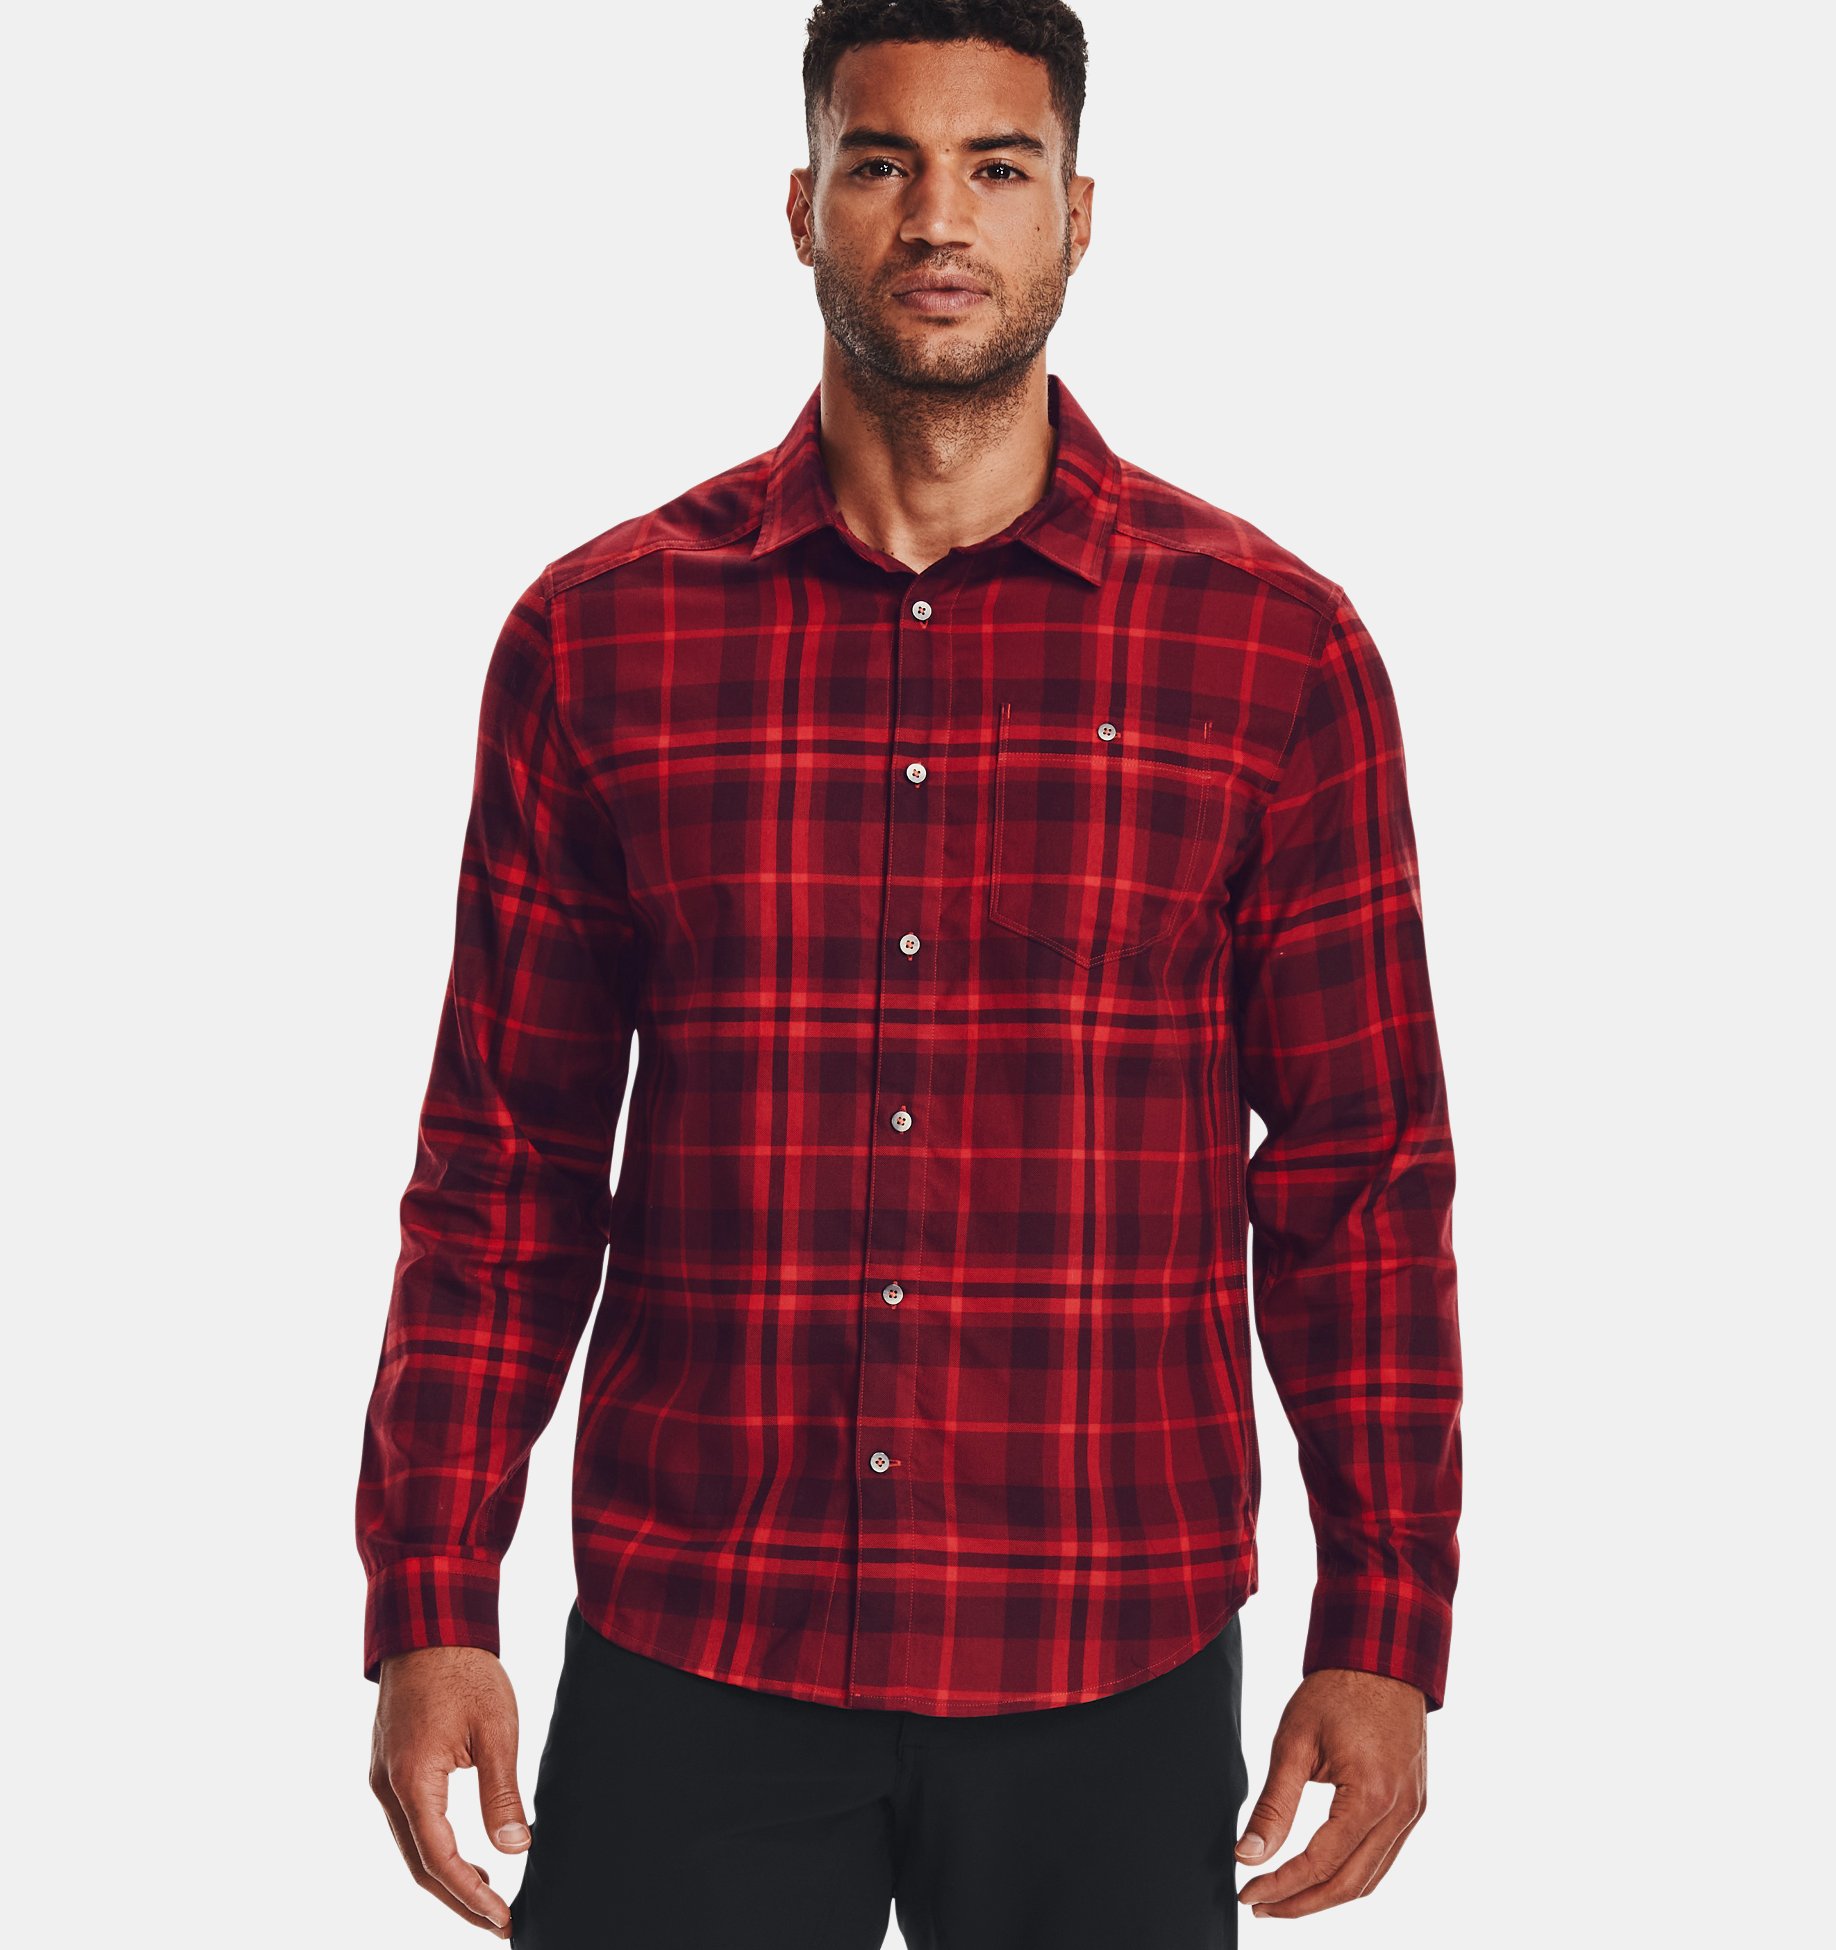 Chemise Under Armour Performance 2.0 Homme